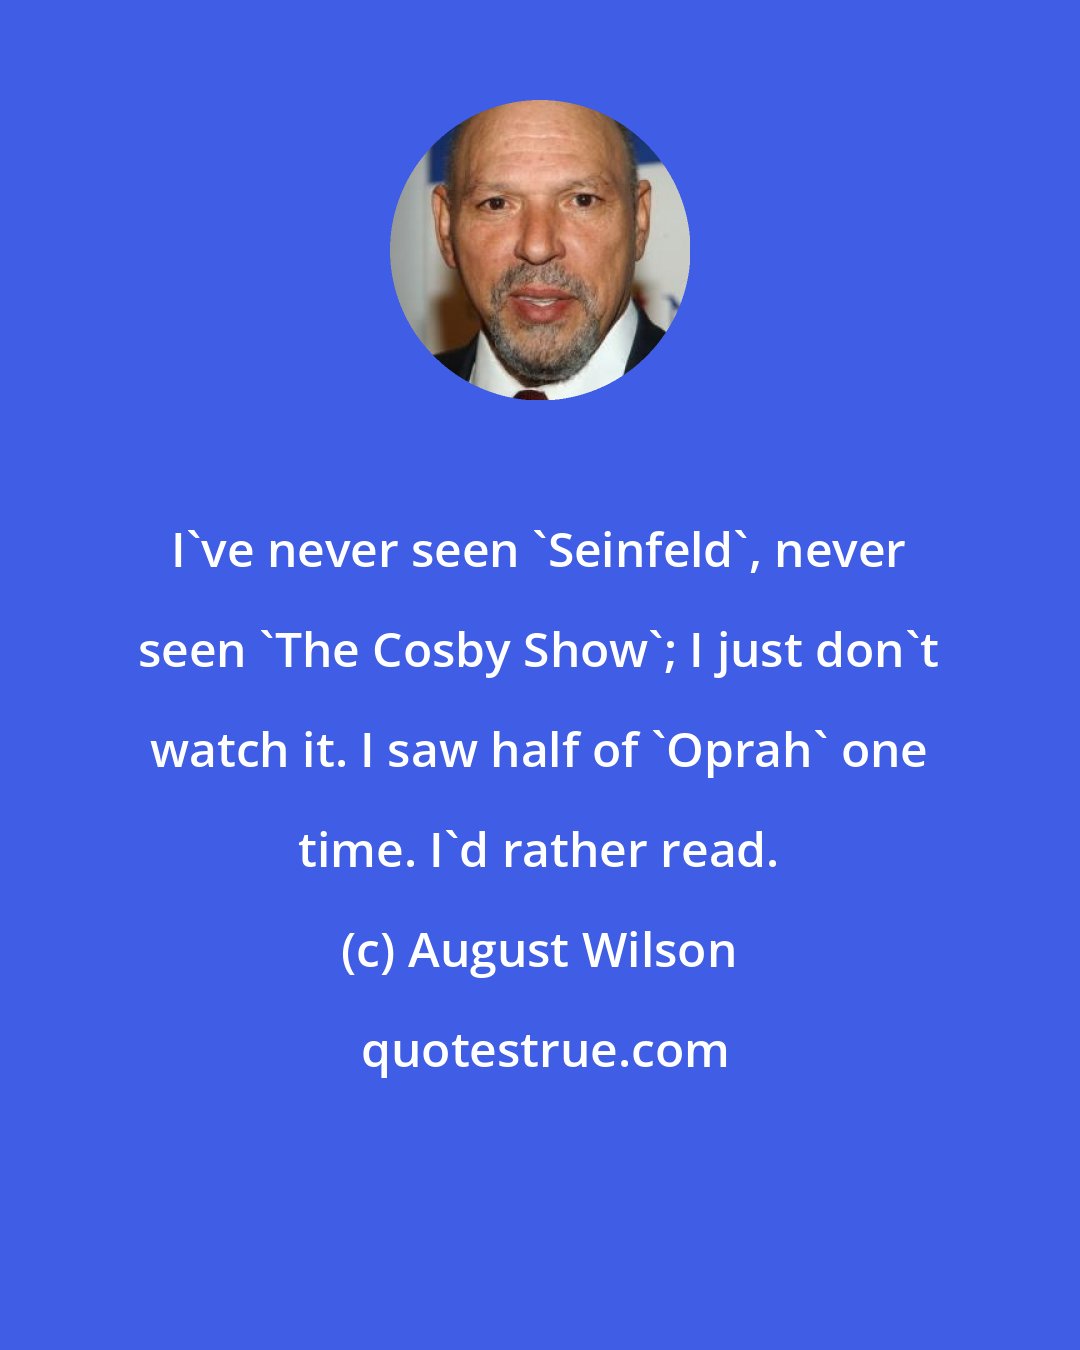 August Wilson: I've never seen 'Seinfeld', never seen 'The Cosby Show'; I just don't watch it. I saw half of 'Oprah' one time. I'd rather read.